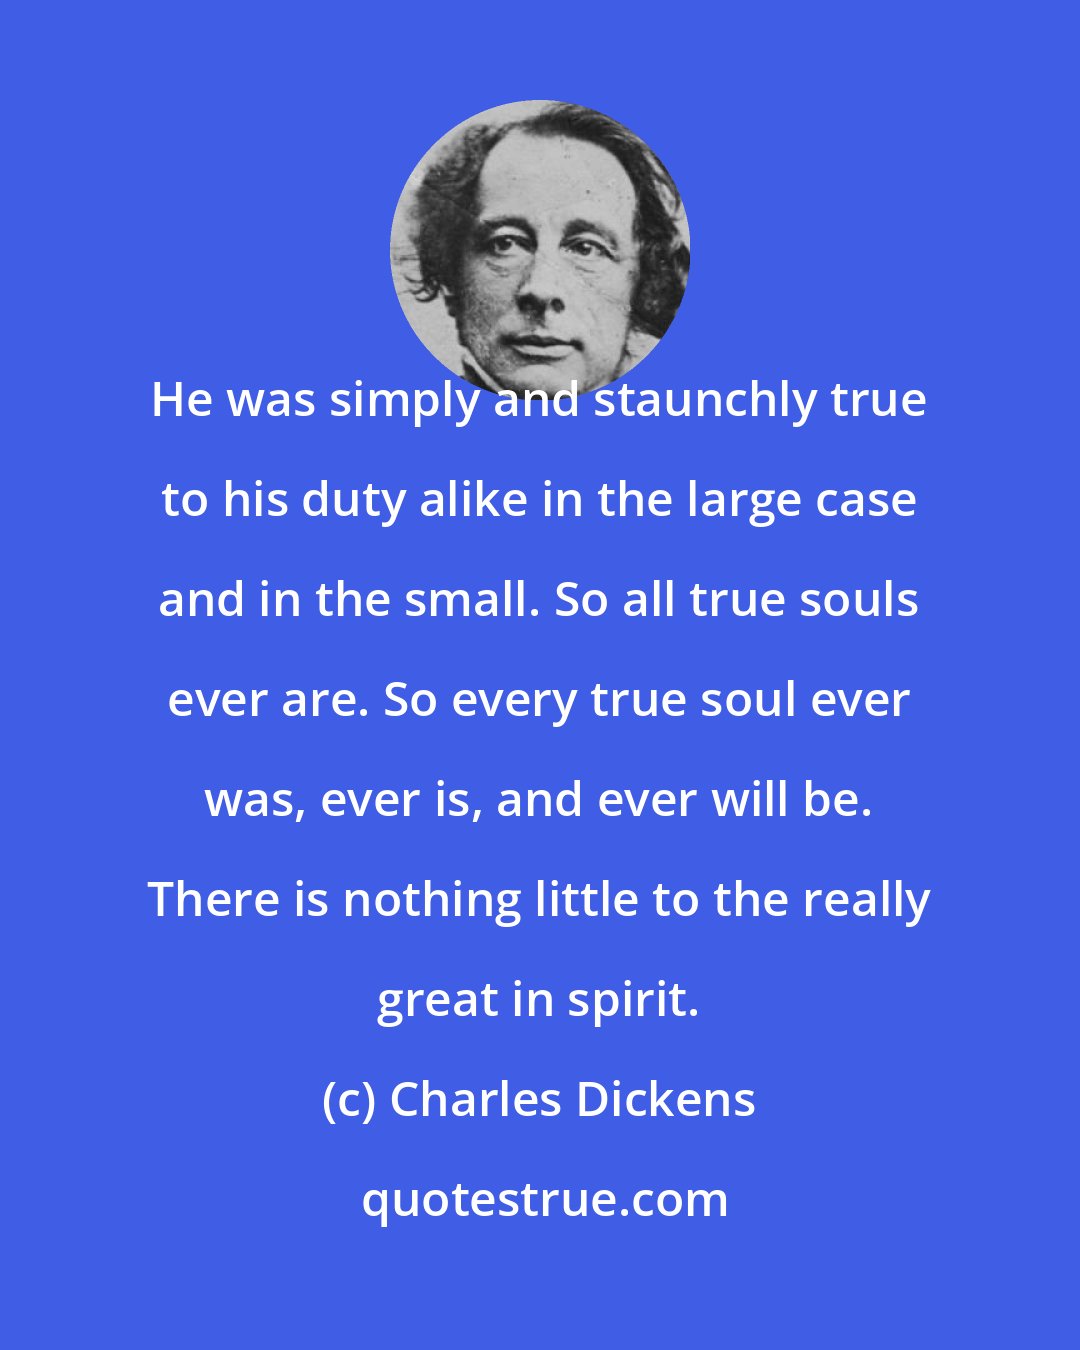 Charles Dickens: He was simply and staunchly true to his duty alike in the large case and in the small. So all true souls ever are. So every true soul ever was, ever is, and ever will be. There is nothing little to the really great in spirit.